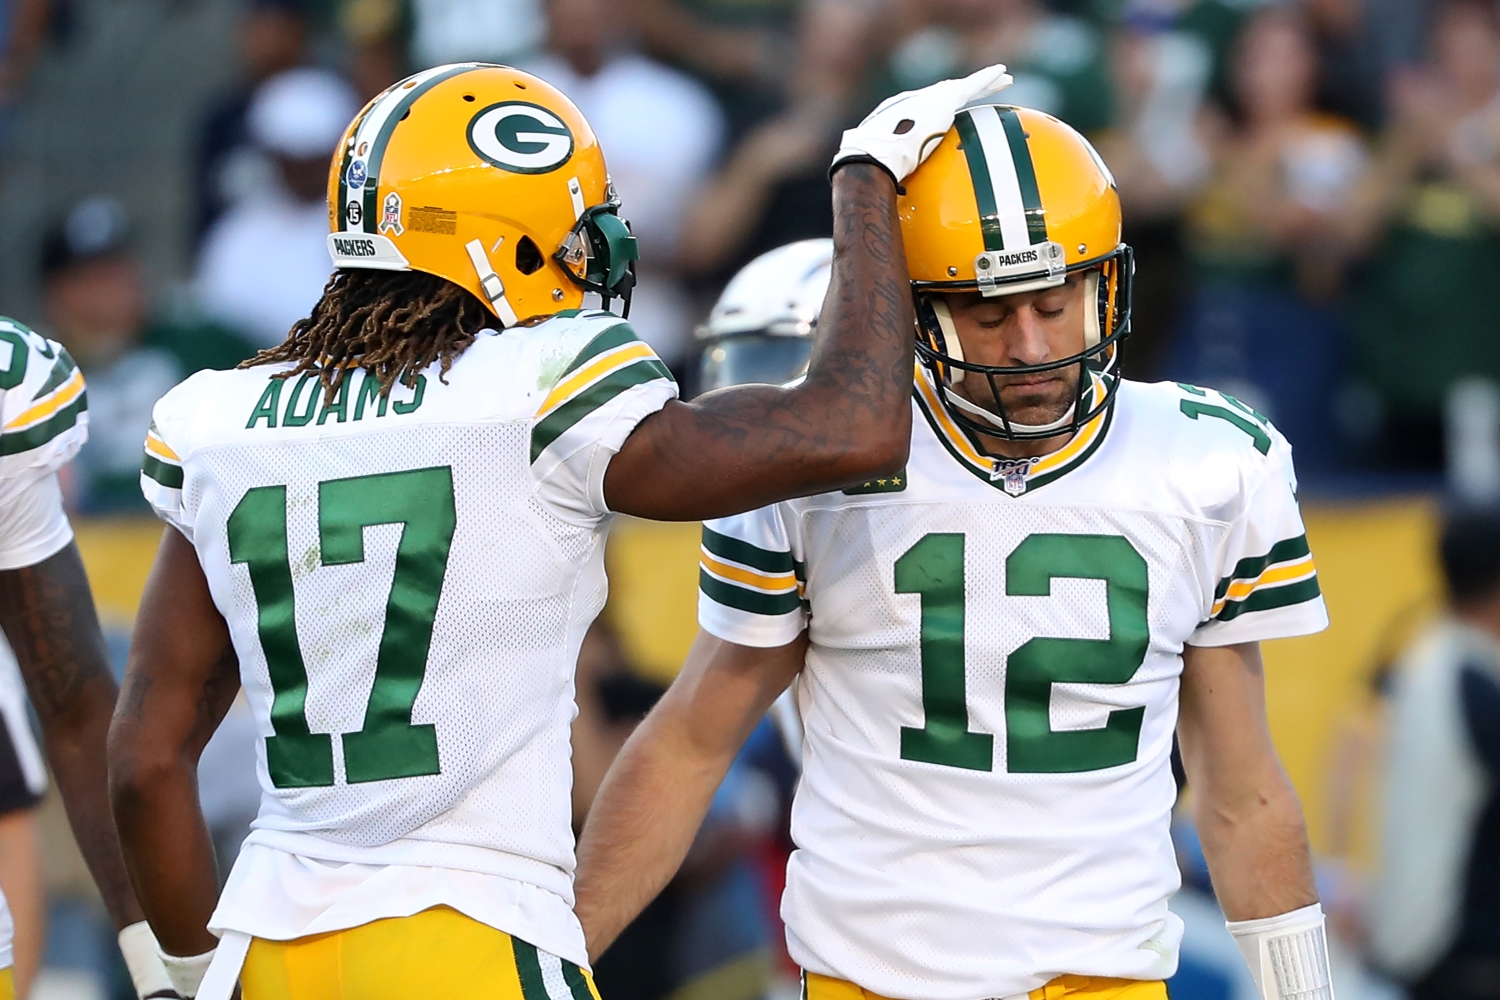 Davante Adams taps Aaron Rodgers on the helmet after a play.